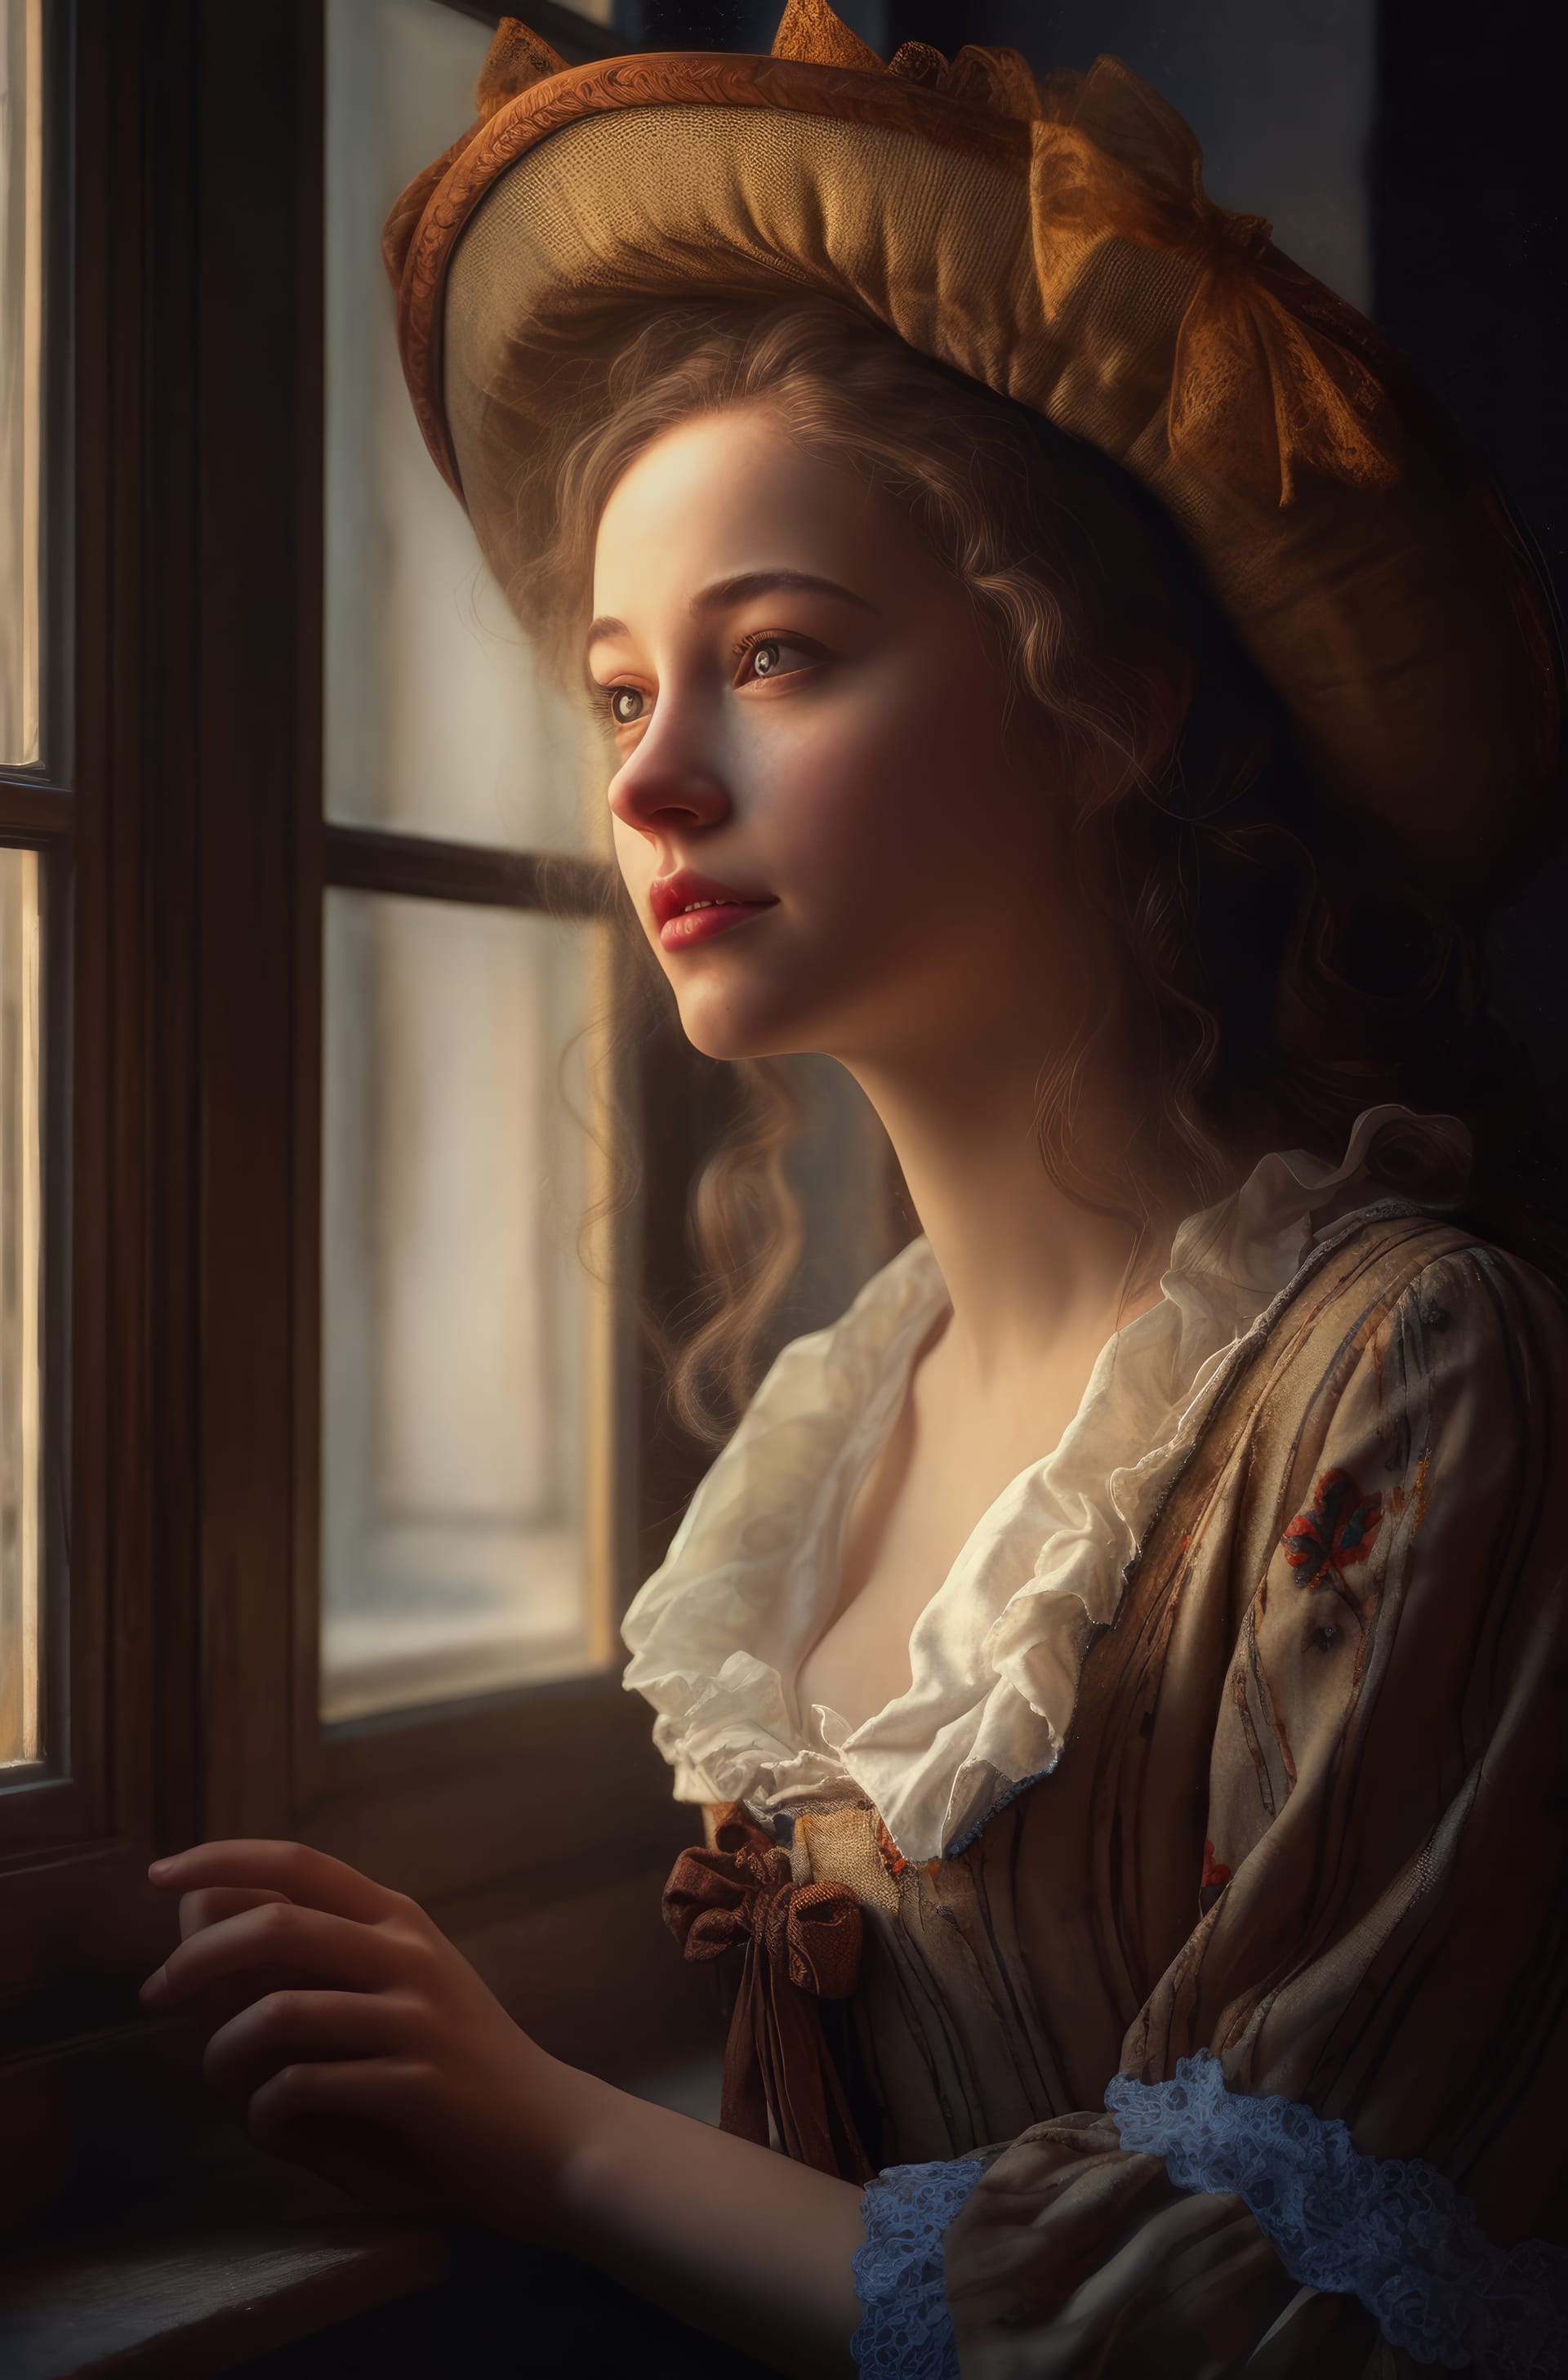 Best instagram profile picture beautiful young woman looking out window